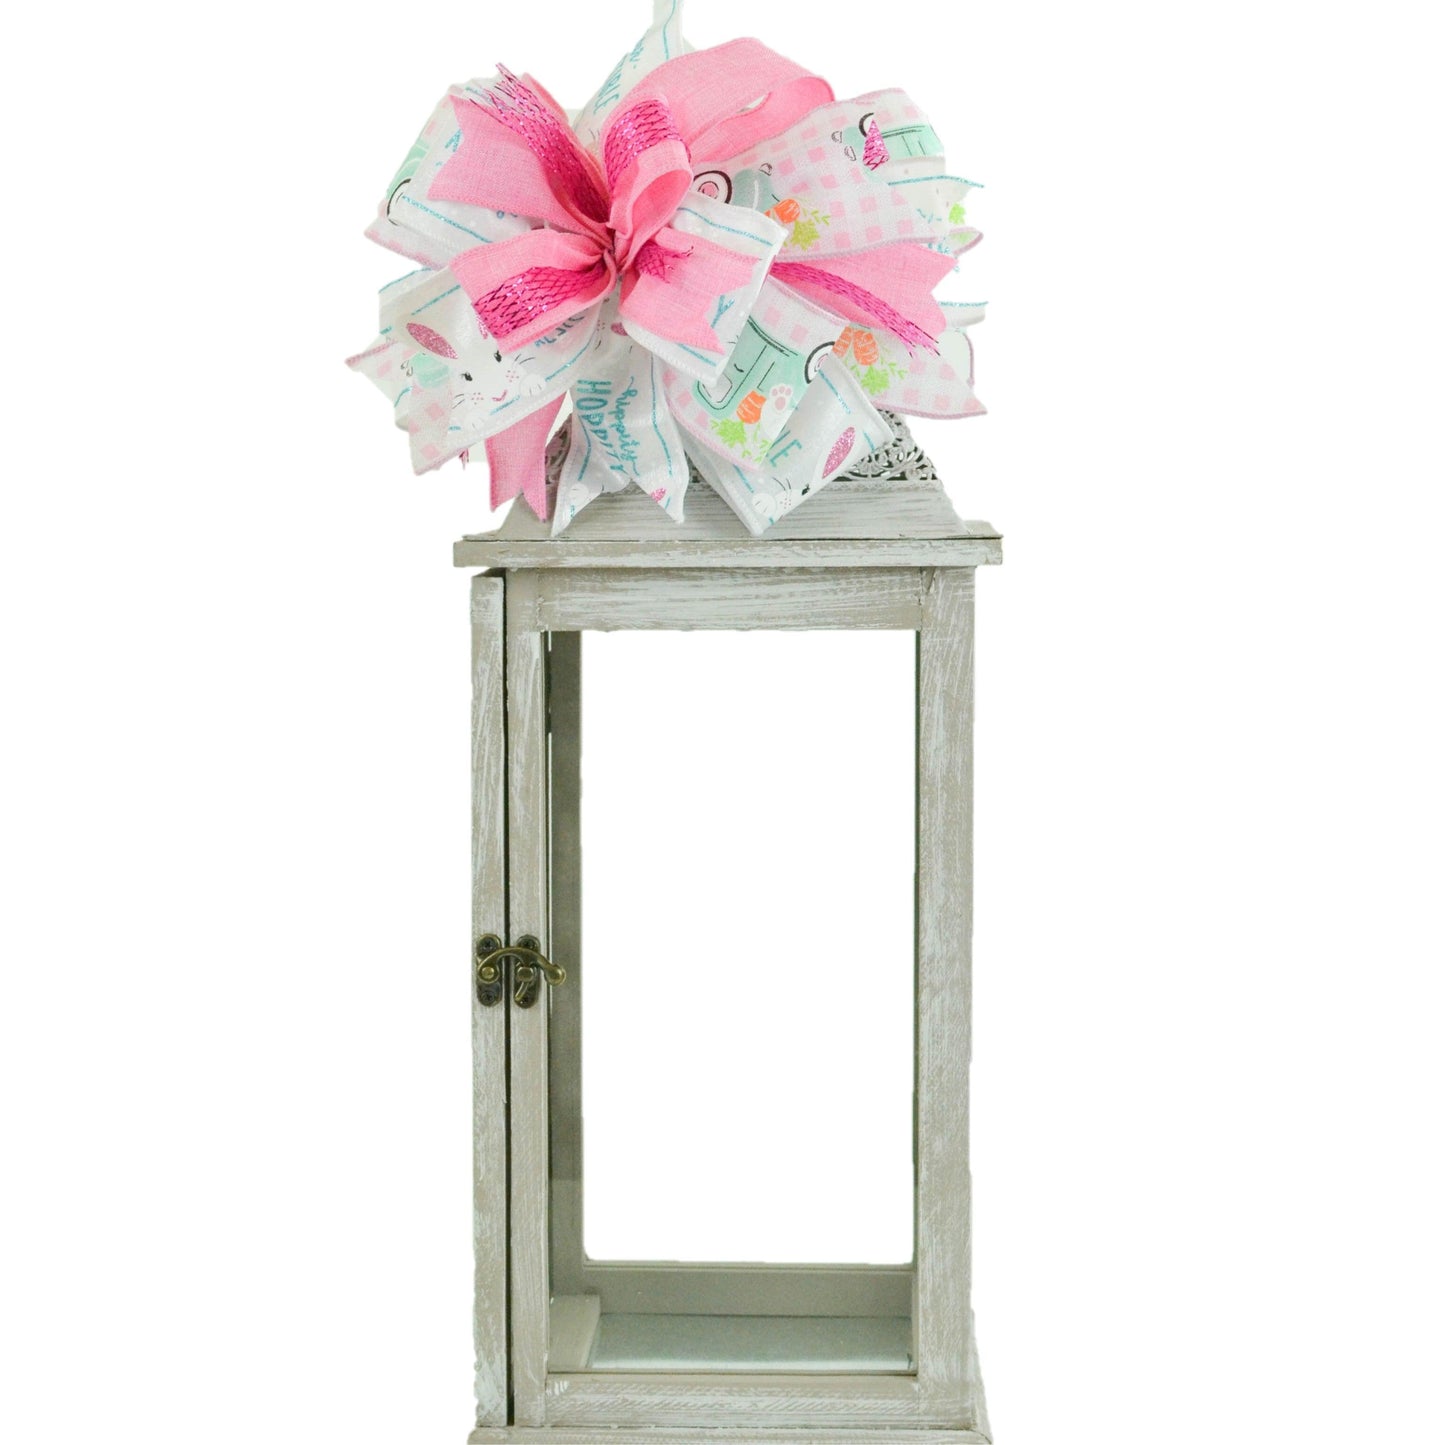 Easter Bunny Plaid Pink Turquoise Truck Lantern Wreath Bow - Burlap Wreath Embellishment for Making Your Own - Layered Full Handmade Farmhouse Already Made - Pink Door Wreaths